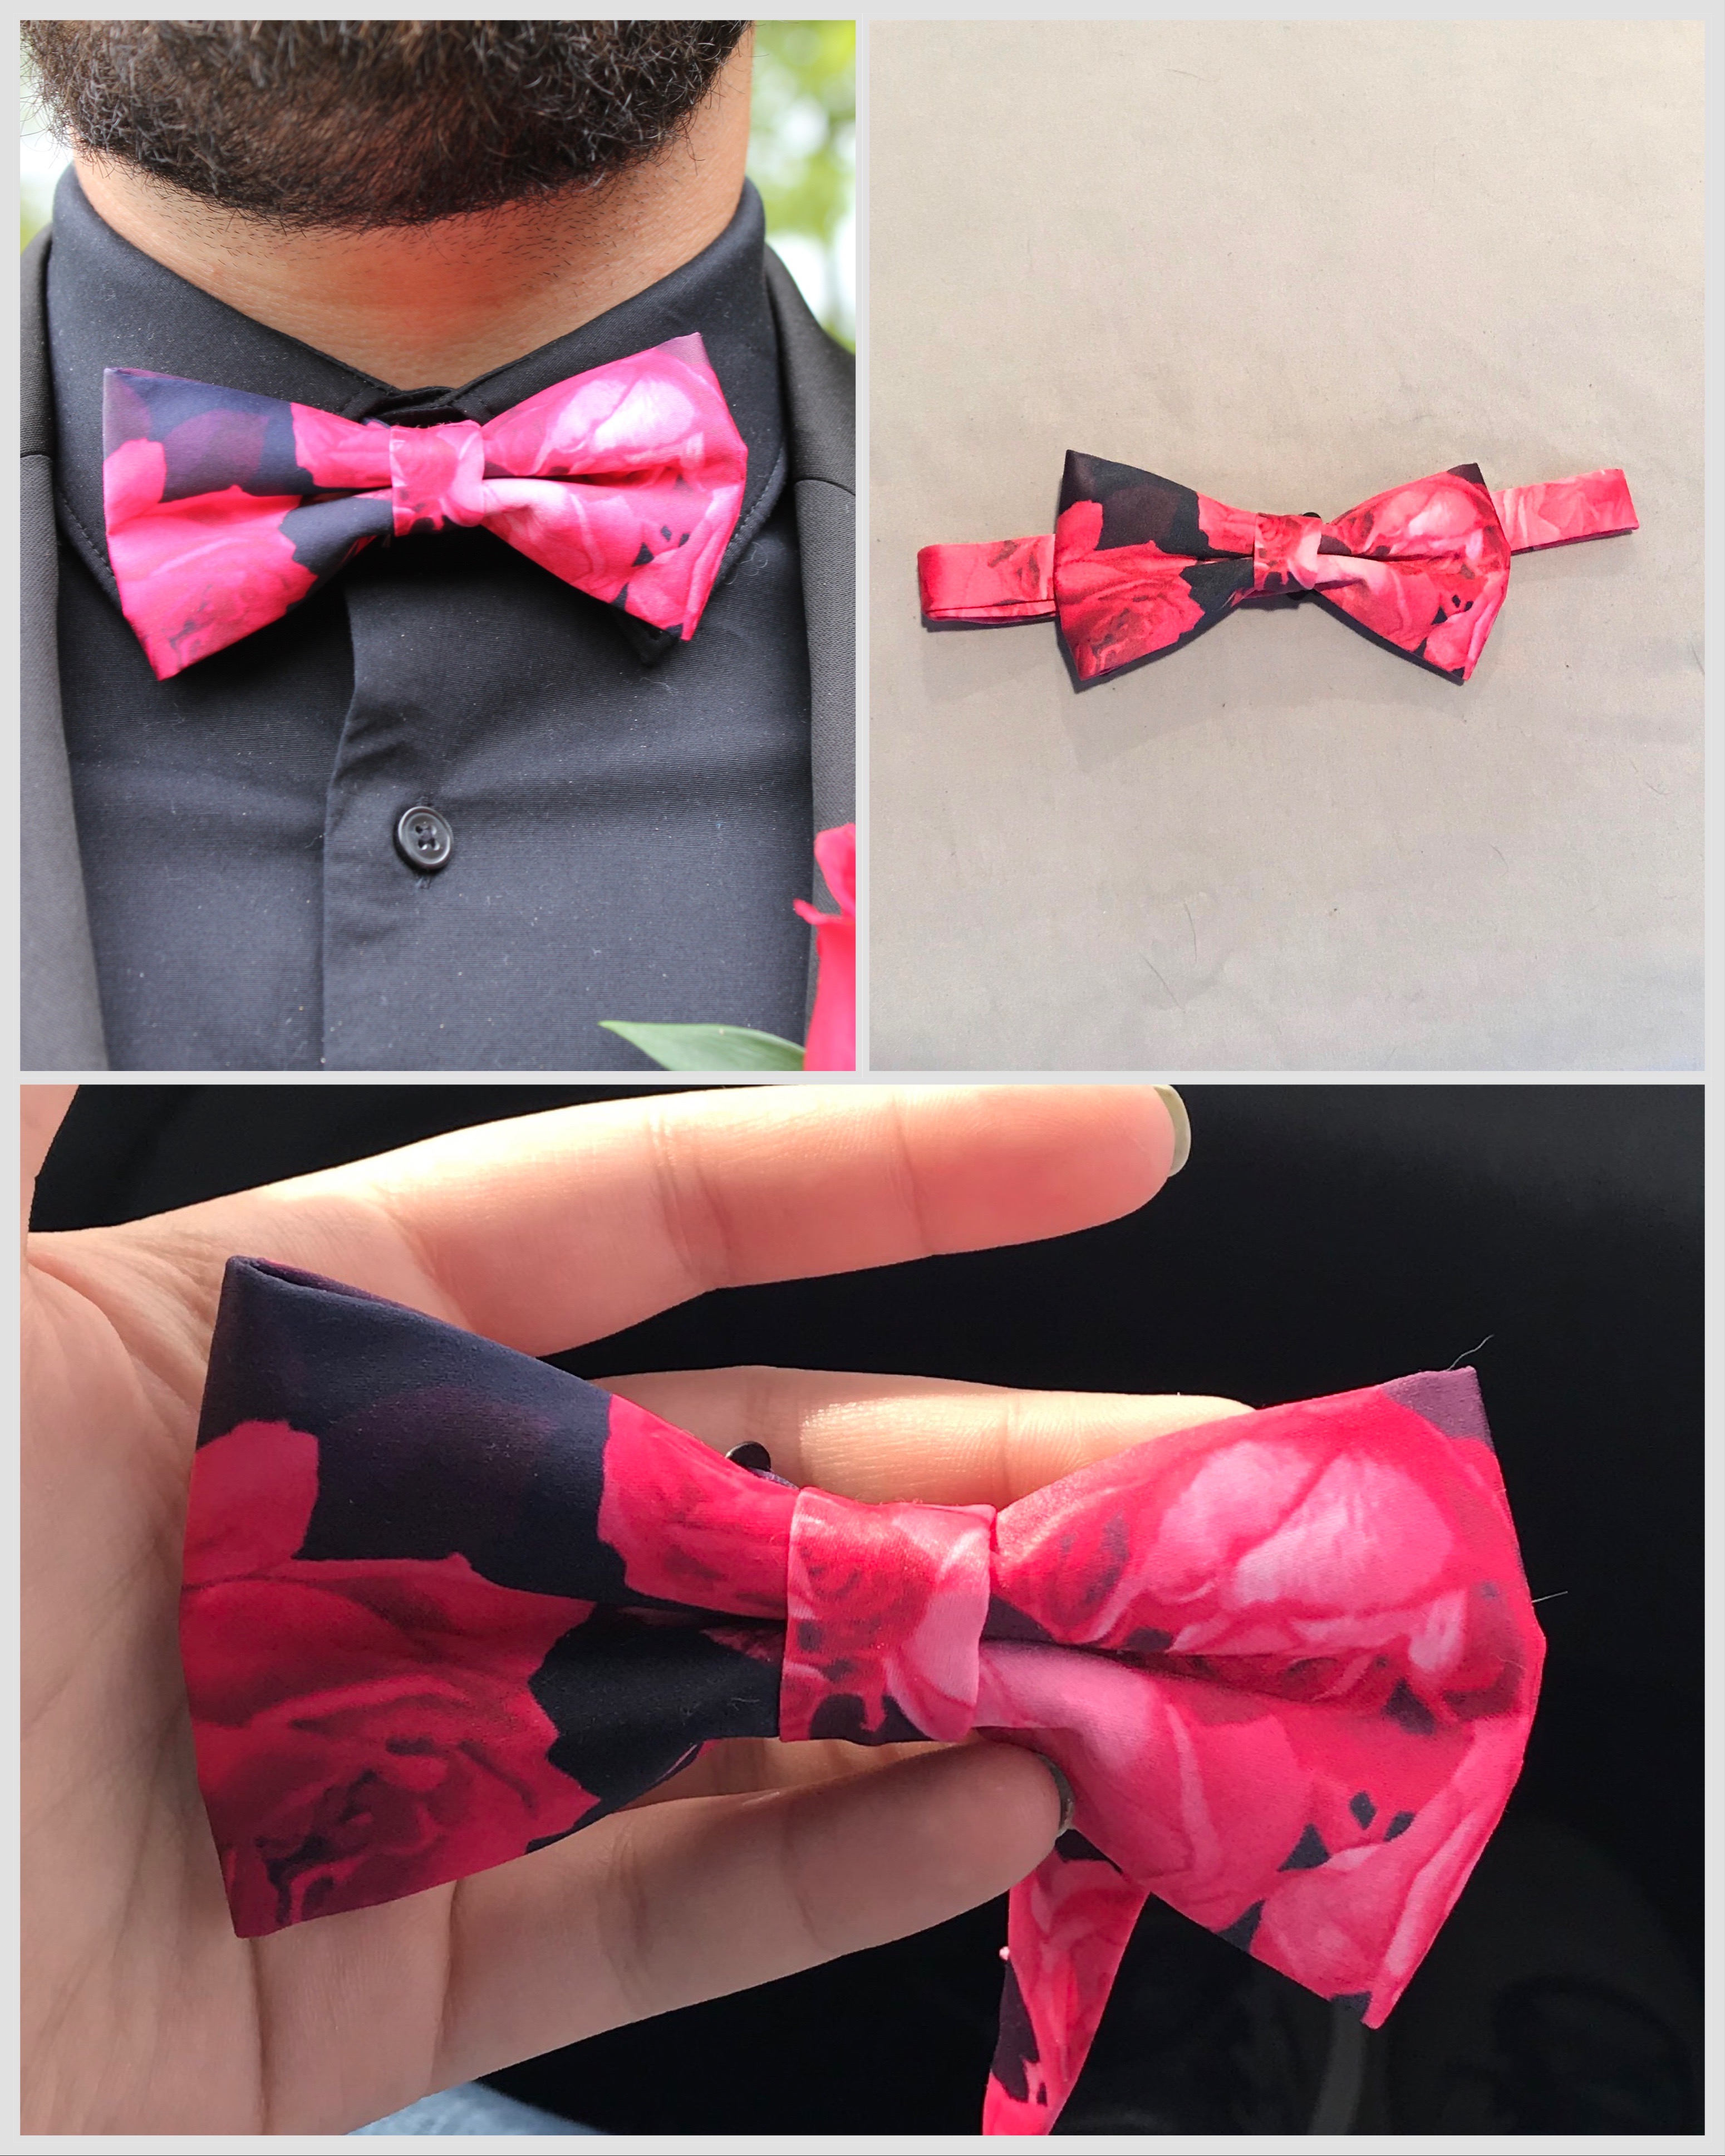 Custom bow tie made to match a formal dress. The bow tie was created by sublimating polyester f